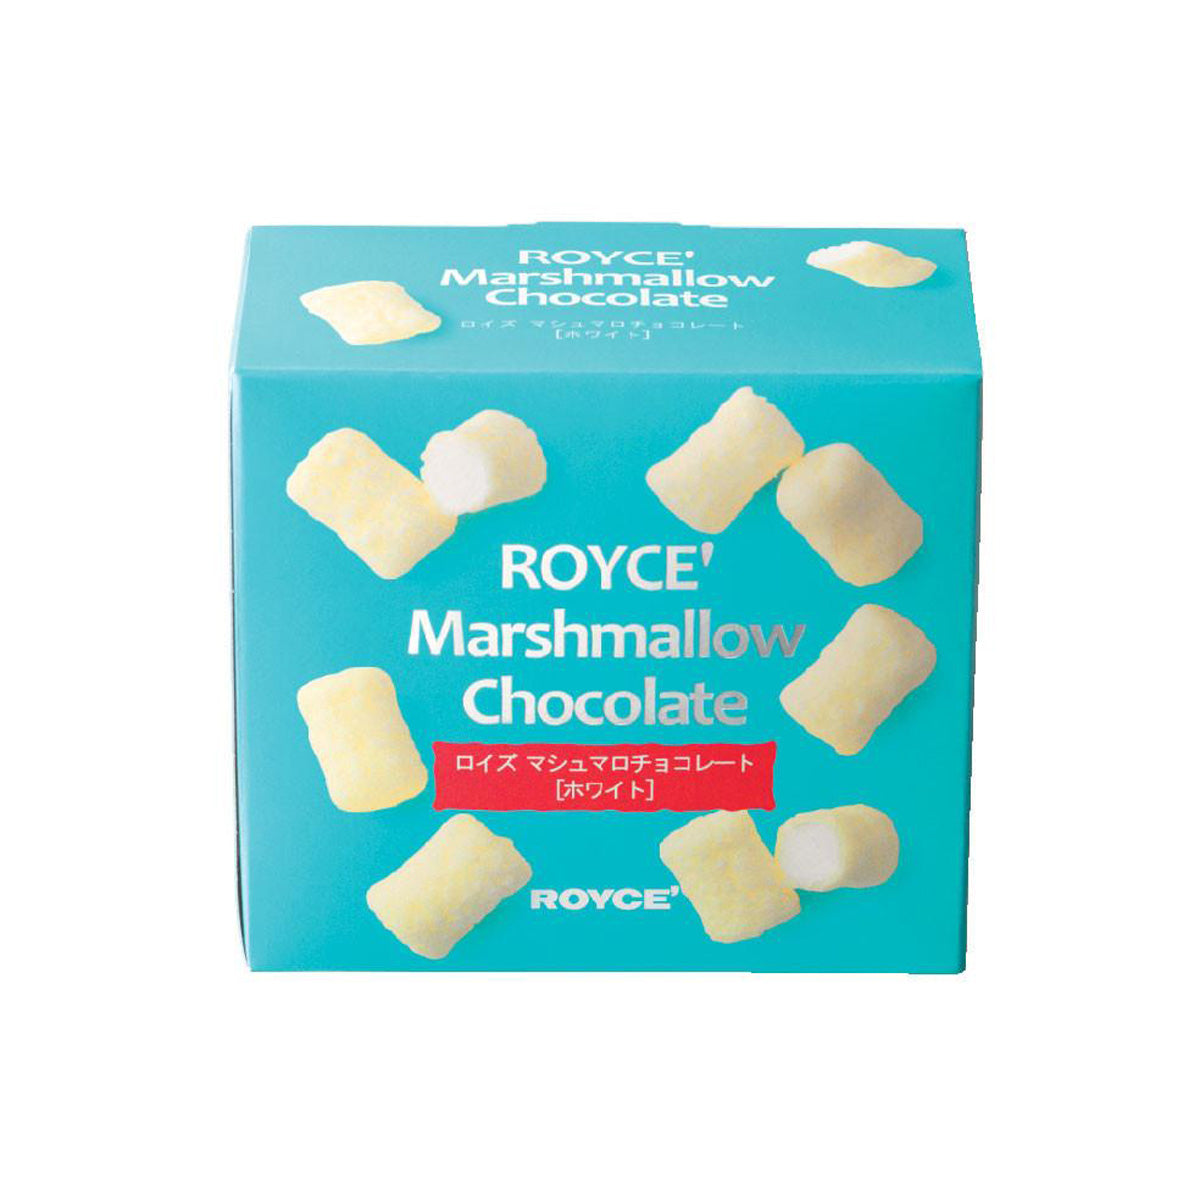 ROYCE' Chocolate - Marshmallow Chocolate "White" - Image shows a blue box with pictures of white chocolate-coated white marshmallows. Top and center texts say ROYCE' Marshmallow Chocolate. Text on bottom says ROYCE'.